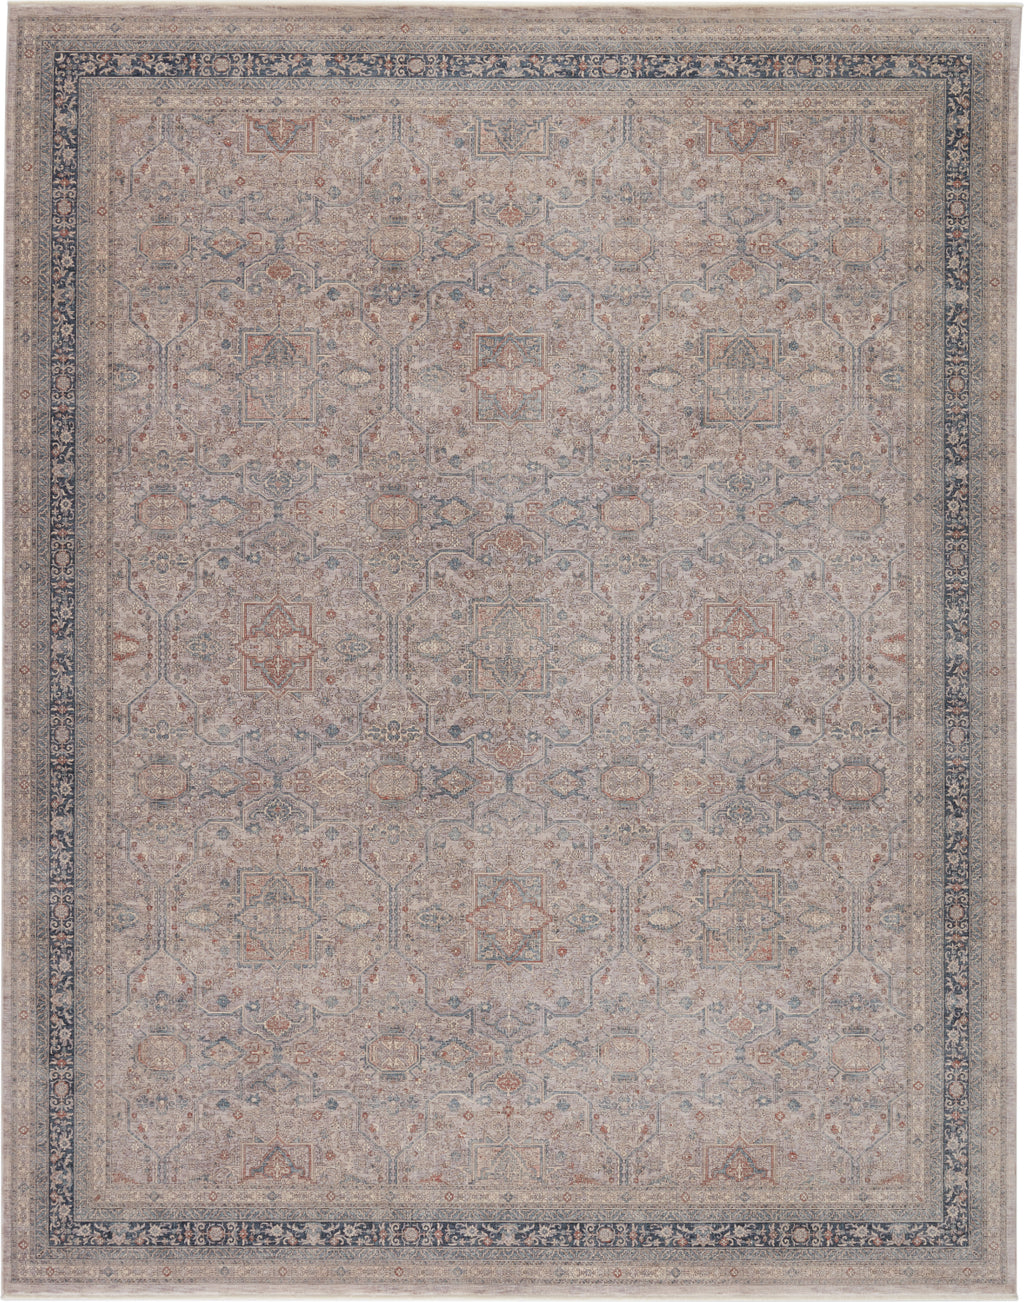 Jaipur Living Winsome Brinson WNO03 Blue/Gray Area Rug - Top Down